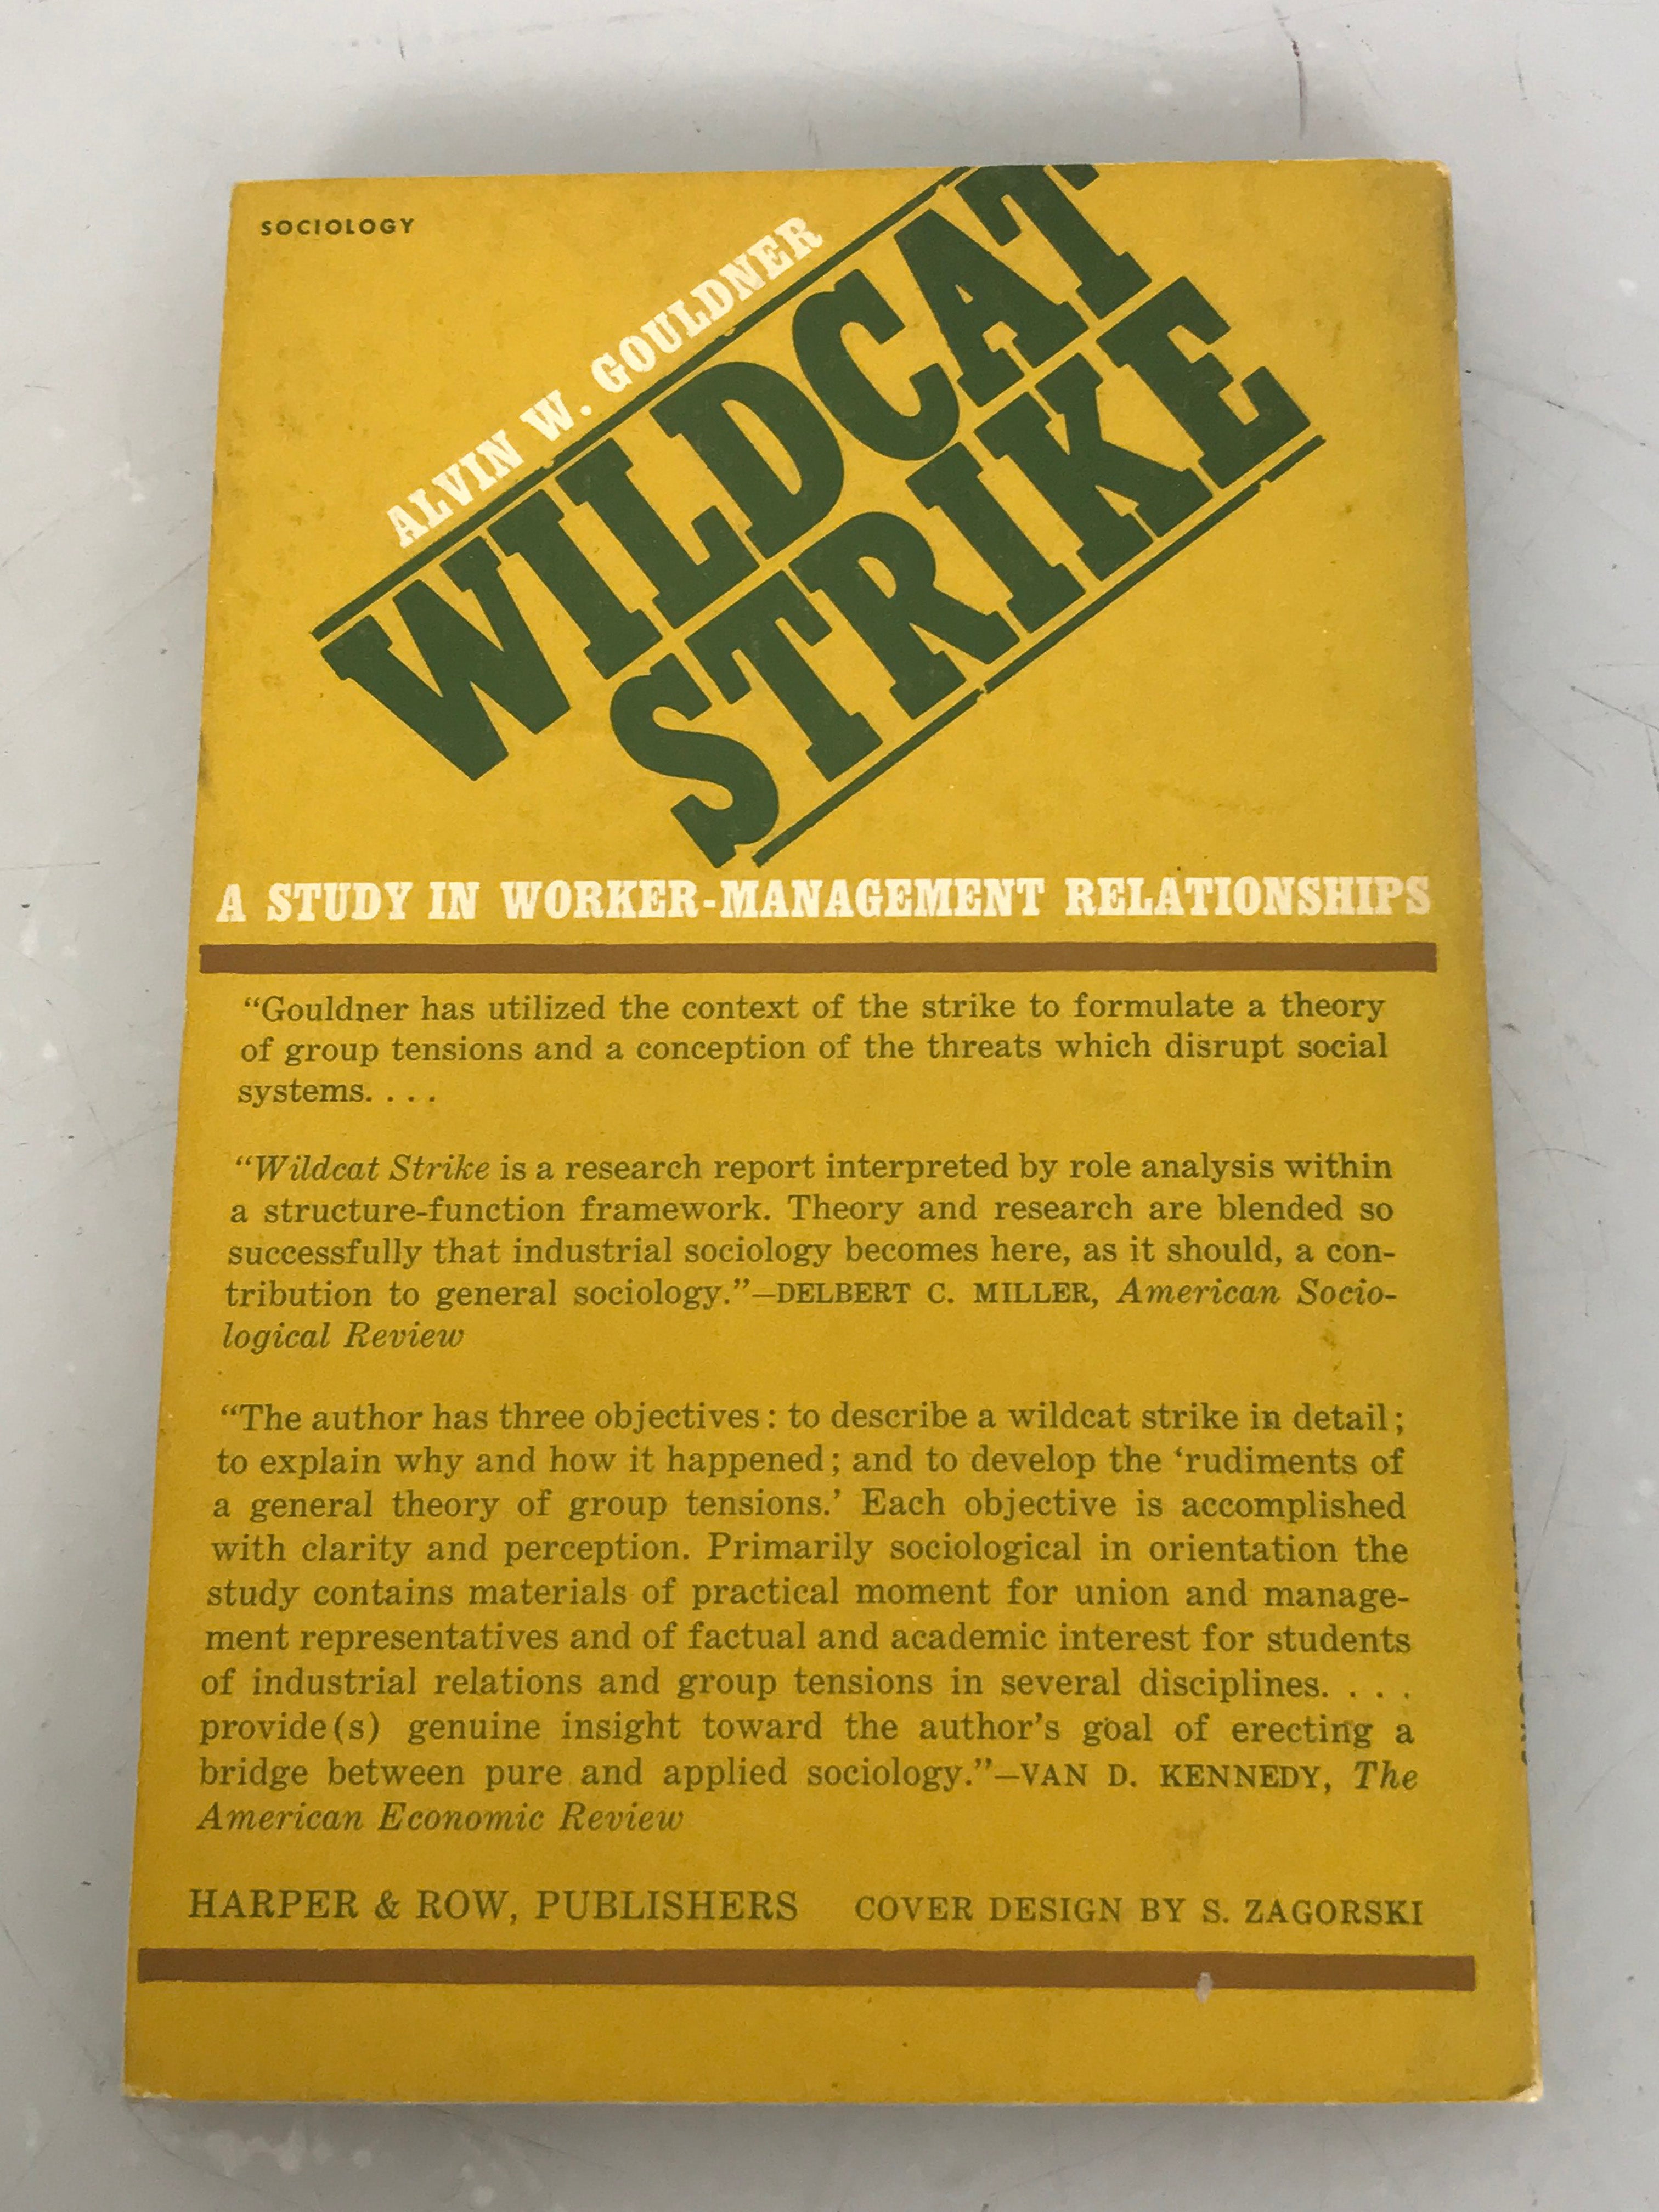 Wildcat Strike A Study in Worker-Management Relationships by Alvin W. Gouldner 1965 SC